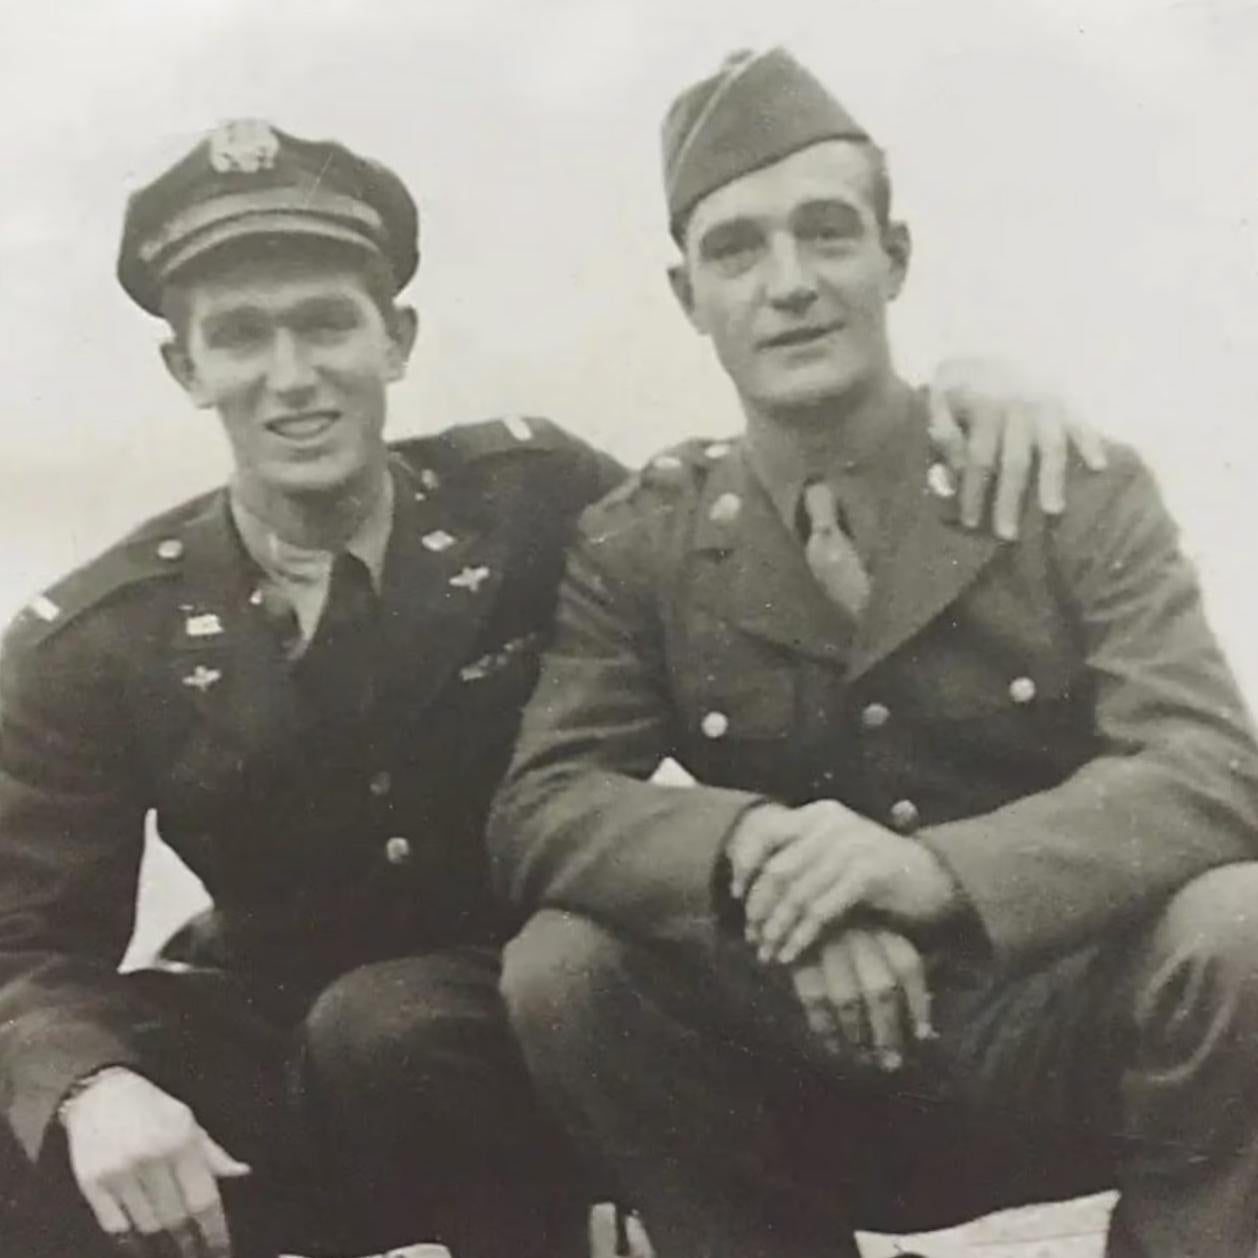 Army Tech. 5th Grade Joe Pinder Jr., right, poses for a photo with his brother, Hal, a first lieutenant and bomber pilot, at an airfield in England in 1943.